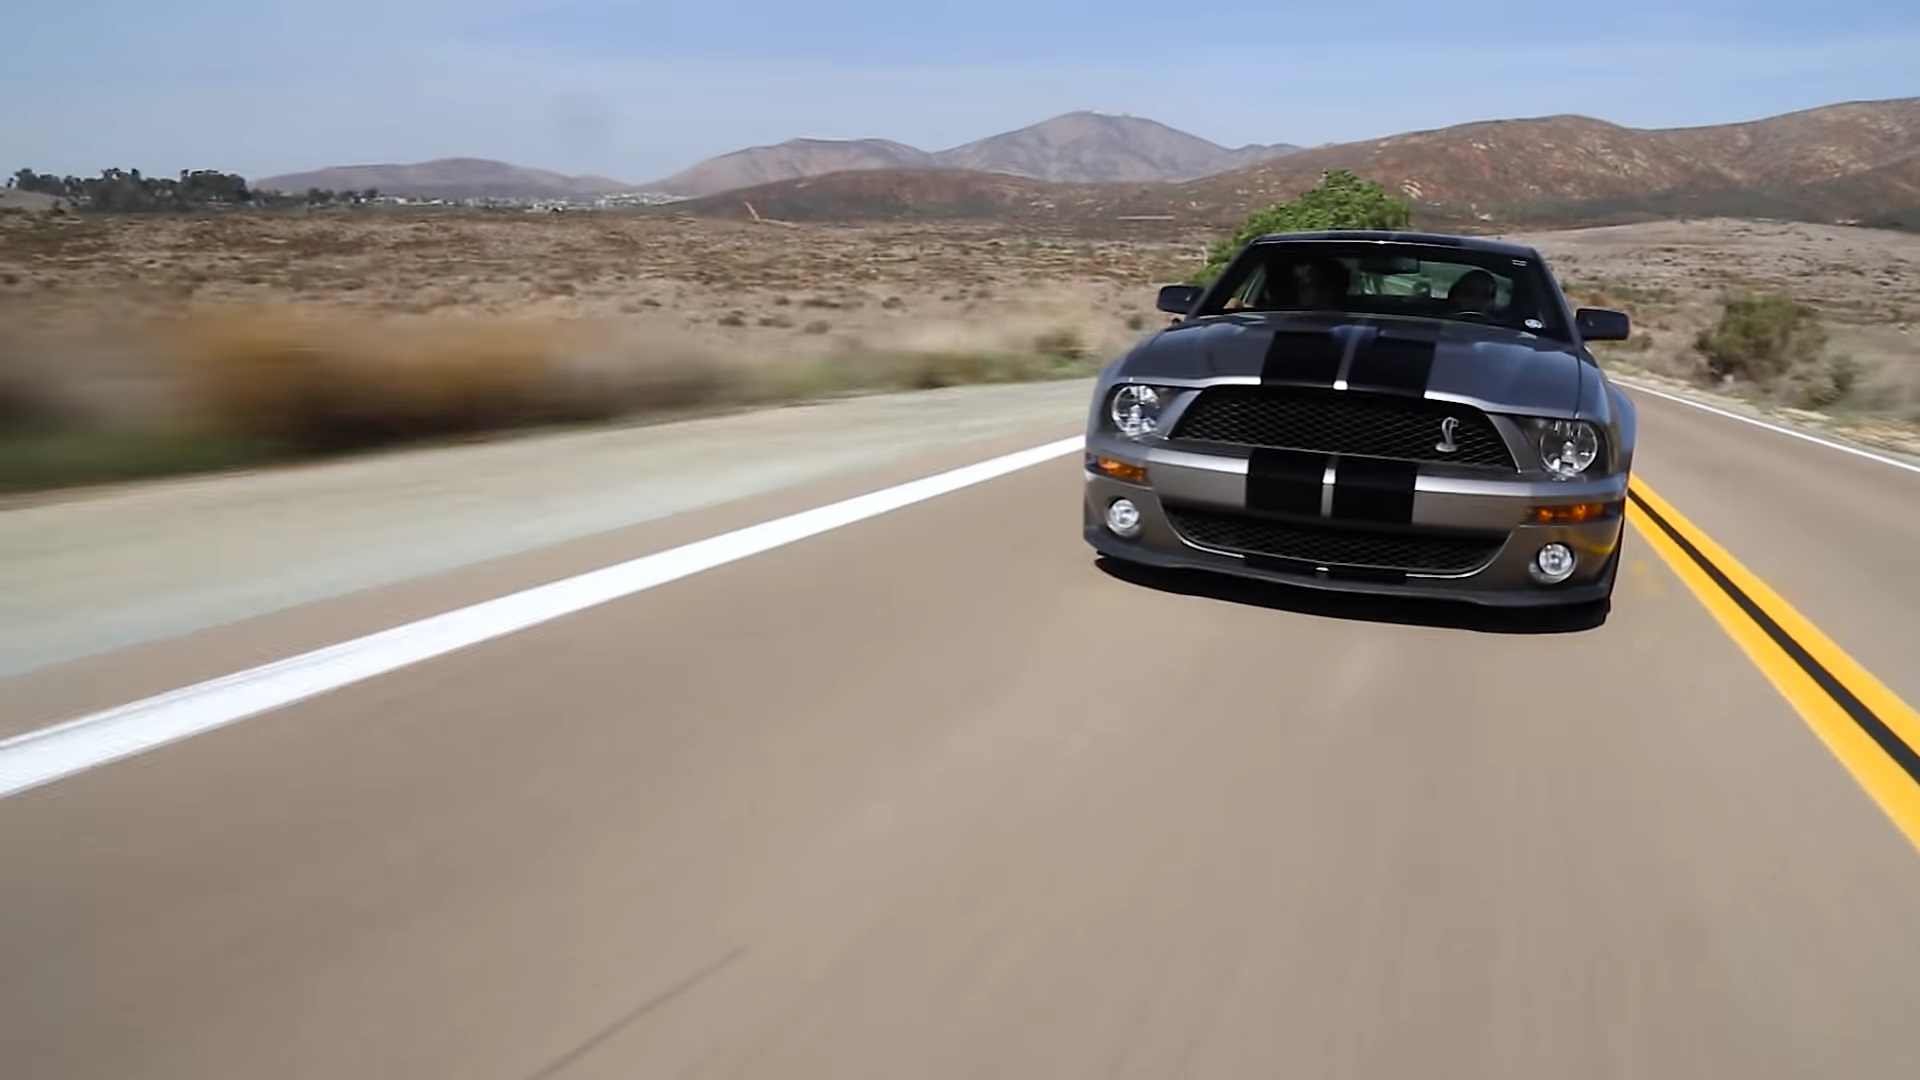 Video: Did The 2008 Ford Mustang Shelby GT500 Started The Horsepower Wars?